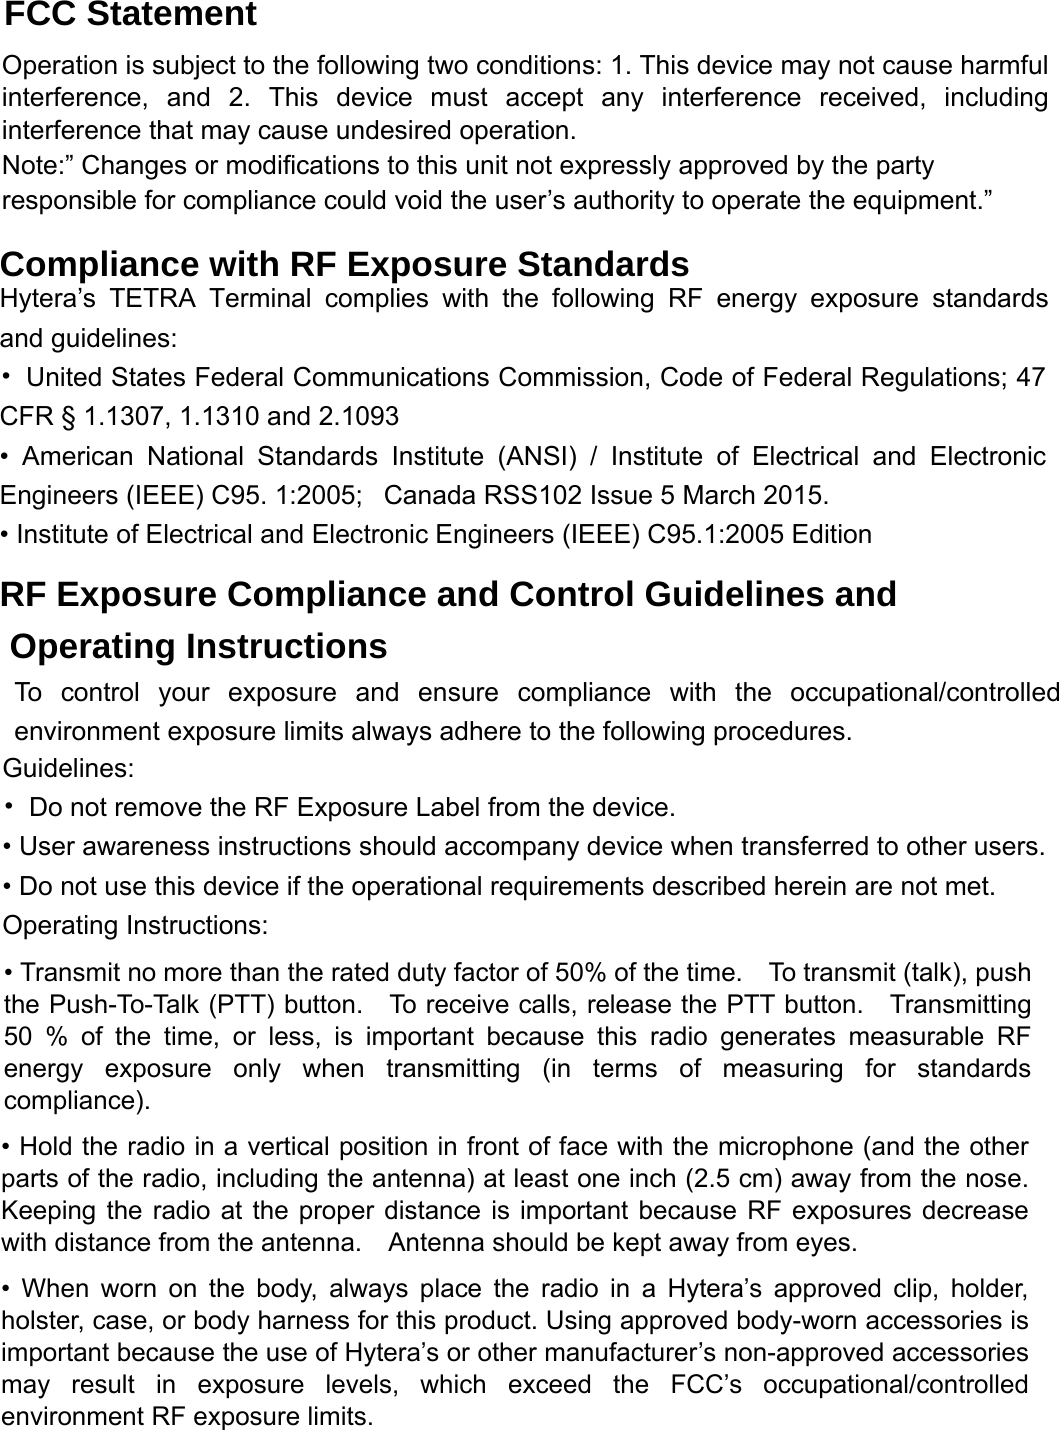 and guidelines: complies with the following RF energy exposure standardsFCC Statement Operation is subject to the following two conditions: 1. This device may not cause harmful interference, and 2. This device must accept any interference received, including interference that may cause undesired operation.   Note:” Changes or modifications to this unit not expressly approved by the party responsible for compliance could void the user’s authority to operate the equipment.” Compliance with RF Exposure Standards Hytera’s TETRA Terminal •  United States Federal Communications Commission, Code of Federal Regulations; 47 CFR § 1.1307, 1.1310 and 2.1093 • American National Standards Institute (ANSI) / Institute of Electrical and Electronic Engineers (IEEE) C95. 1:2005;   Canada RSS102 Issue 5 March 2015.• Institute of Electrical and Electronic Engineers (IEEE) C95.1:2005 Edition RF Exposure Compliance and Control Guidelines and Operating Instructions To control your exposure and ensure compliance with the occupational/controlled environment exposure limits always adhere to the following procedures. Guidelines: •  Do not remove the RF Exposure Label from the device.   • User awareness instructions should accompany device when transferred to other users.   • Do not use this device if the operational requirements described herein are not met. Operating Instructions:   • Transmit no more than the rated duty factor of 50% of the time.    To transmit (talk), push the Push-To-Talk (PTT) button.  To receive calls, release the PTT button.  Transmitting 50 % of the time, or less, is important because this radio generates measurable RF energy exposure only when transmitting (in terms of measuring for standards compliance). • Hold the radio in a vertical position in front of face with the microphone (and the other parts of the radio, including the antenna) at least one inch (2.5 cm) away from the nose.   Keeping the radio at the proper distance is important because RF exposures decrease with distance from the antenna.    Antenna should be kept away from eyes.   • When worn on the body, always place the radio in a Hytera’s approved clip, holder, holster, case, or body harness for this product. Using approved body-worn accessories is important because the use of Hytera’s or other manufacturer’s non-approved accessories may result in exposure levels, which exceed the FCC’s occupational/controlled environment RF exposure limits. 